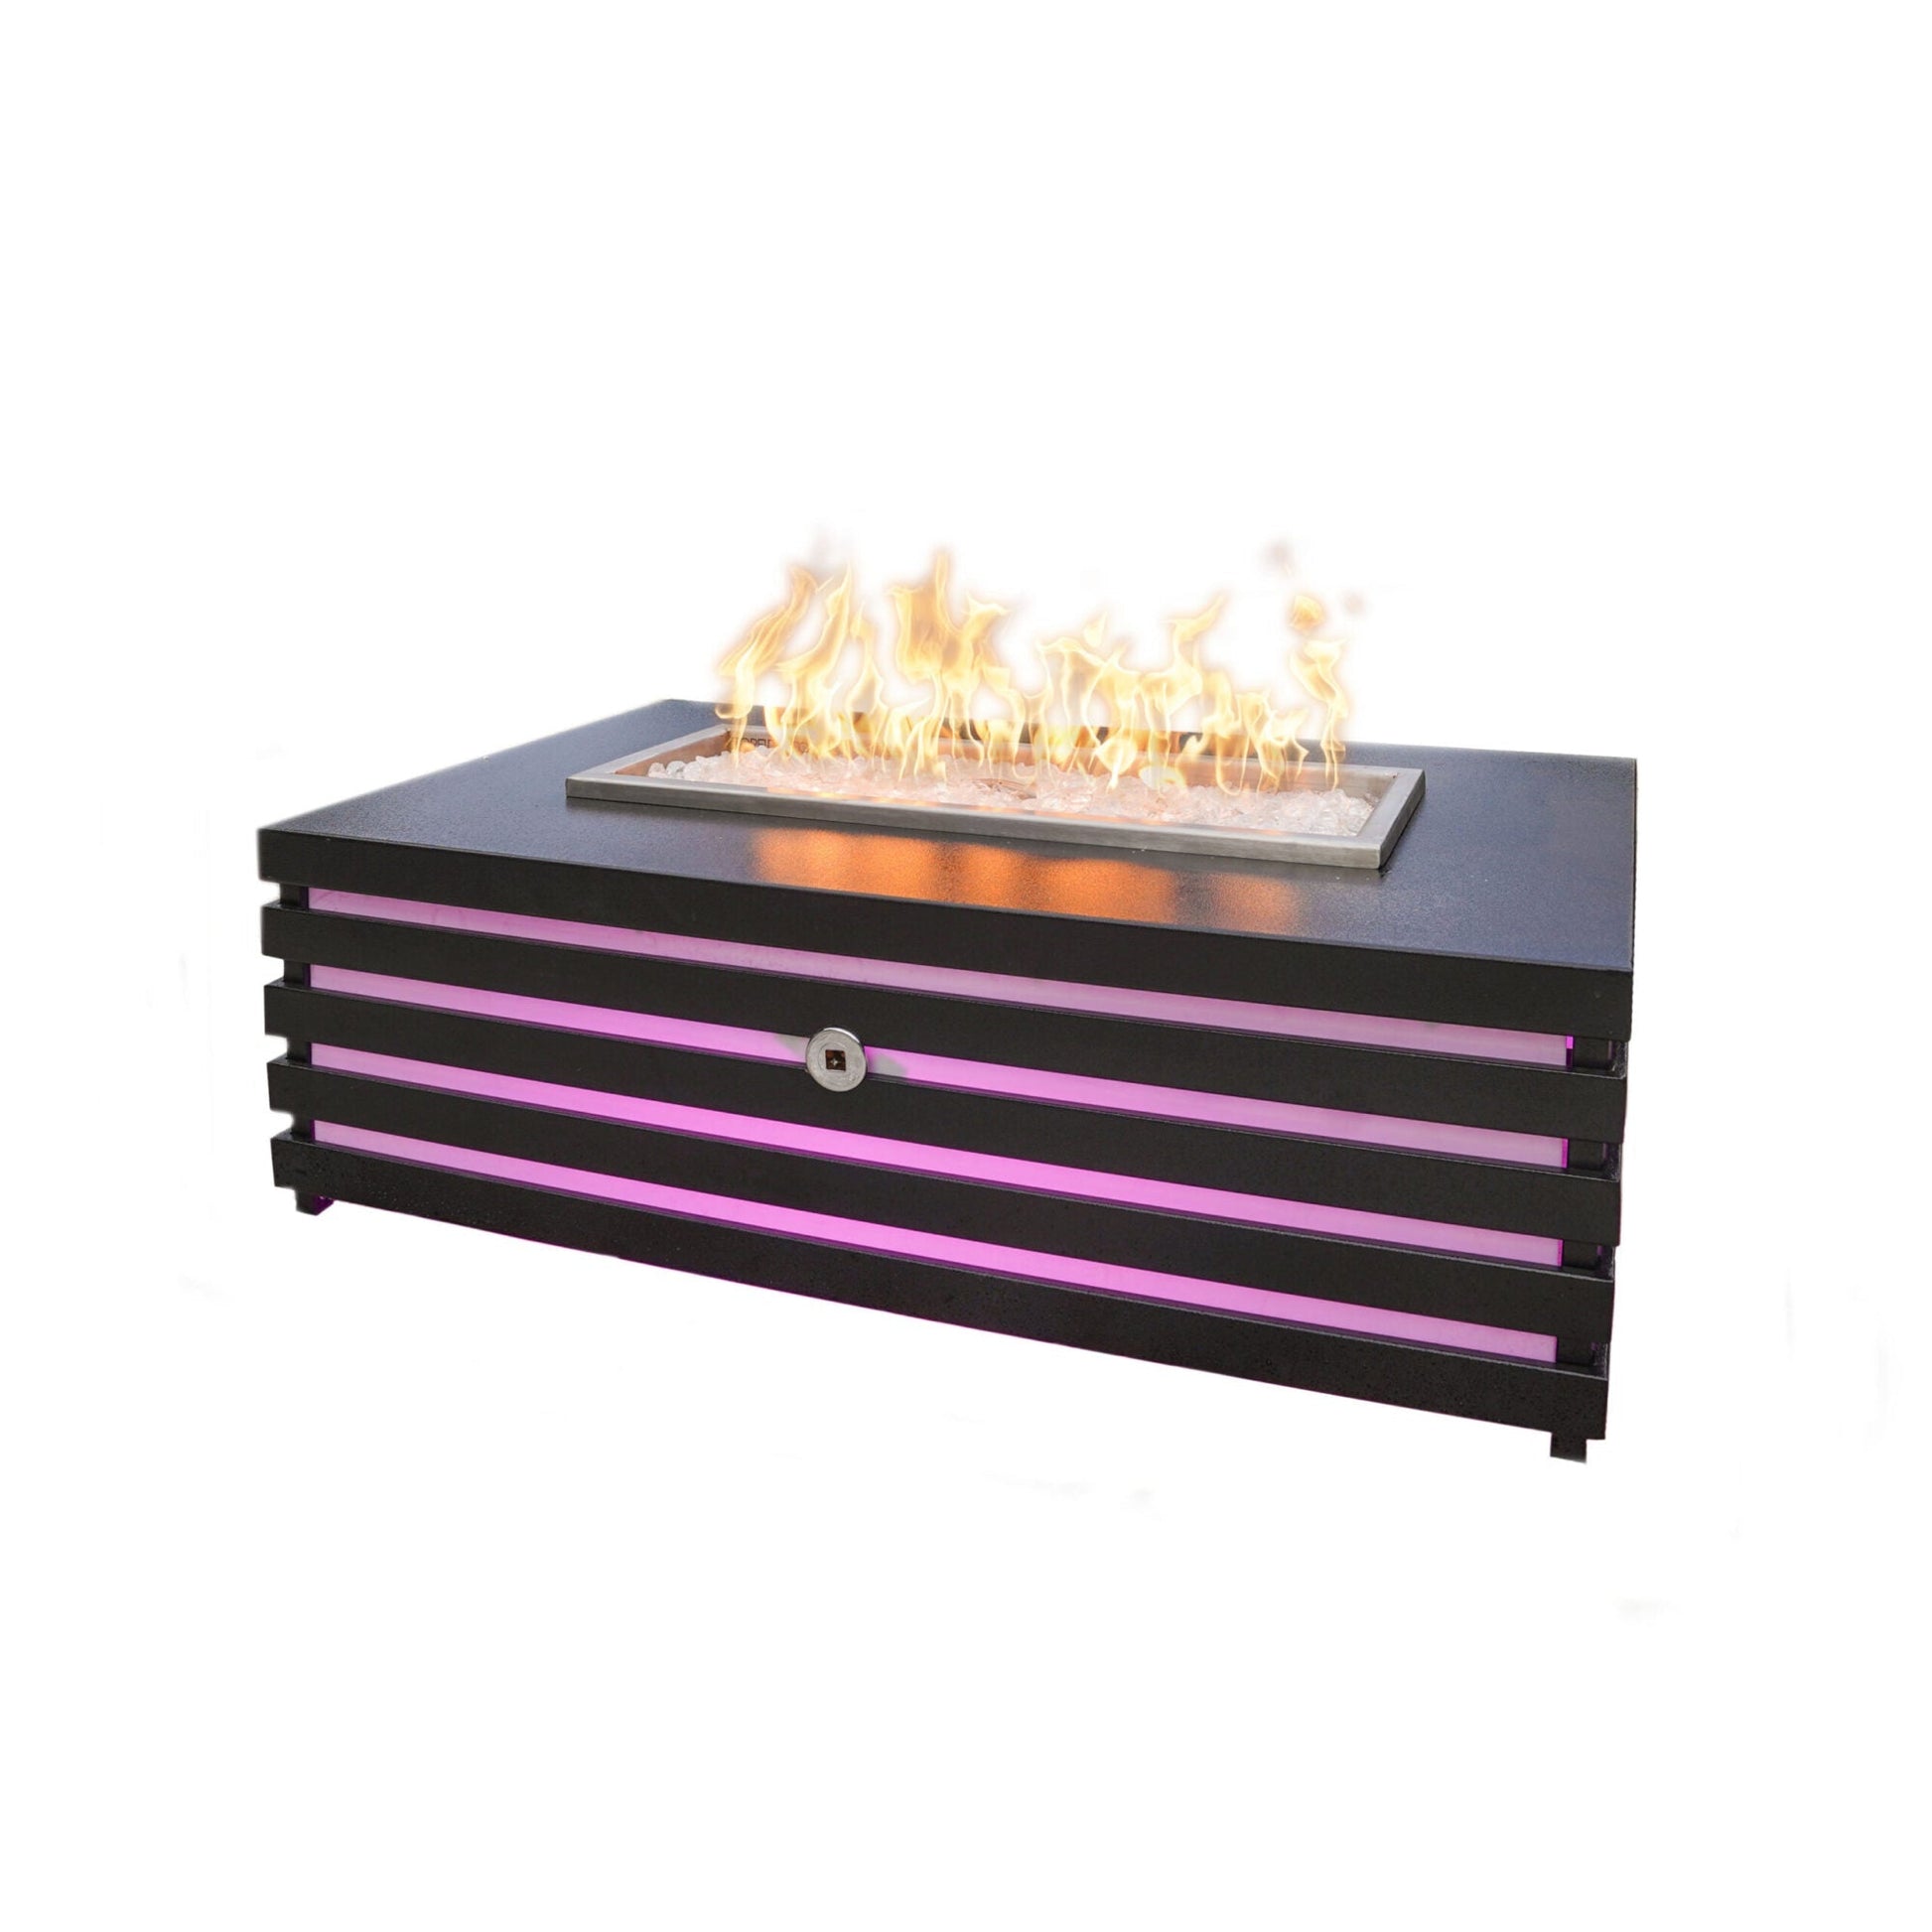 The Outdoor Plus Amina 48" Java Powder Coated Liquid Propane Fire Pit with Flame Sense with Spark Ignition